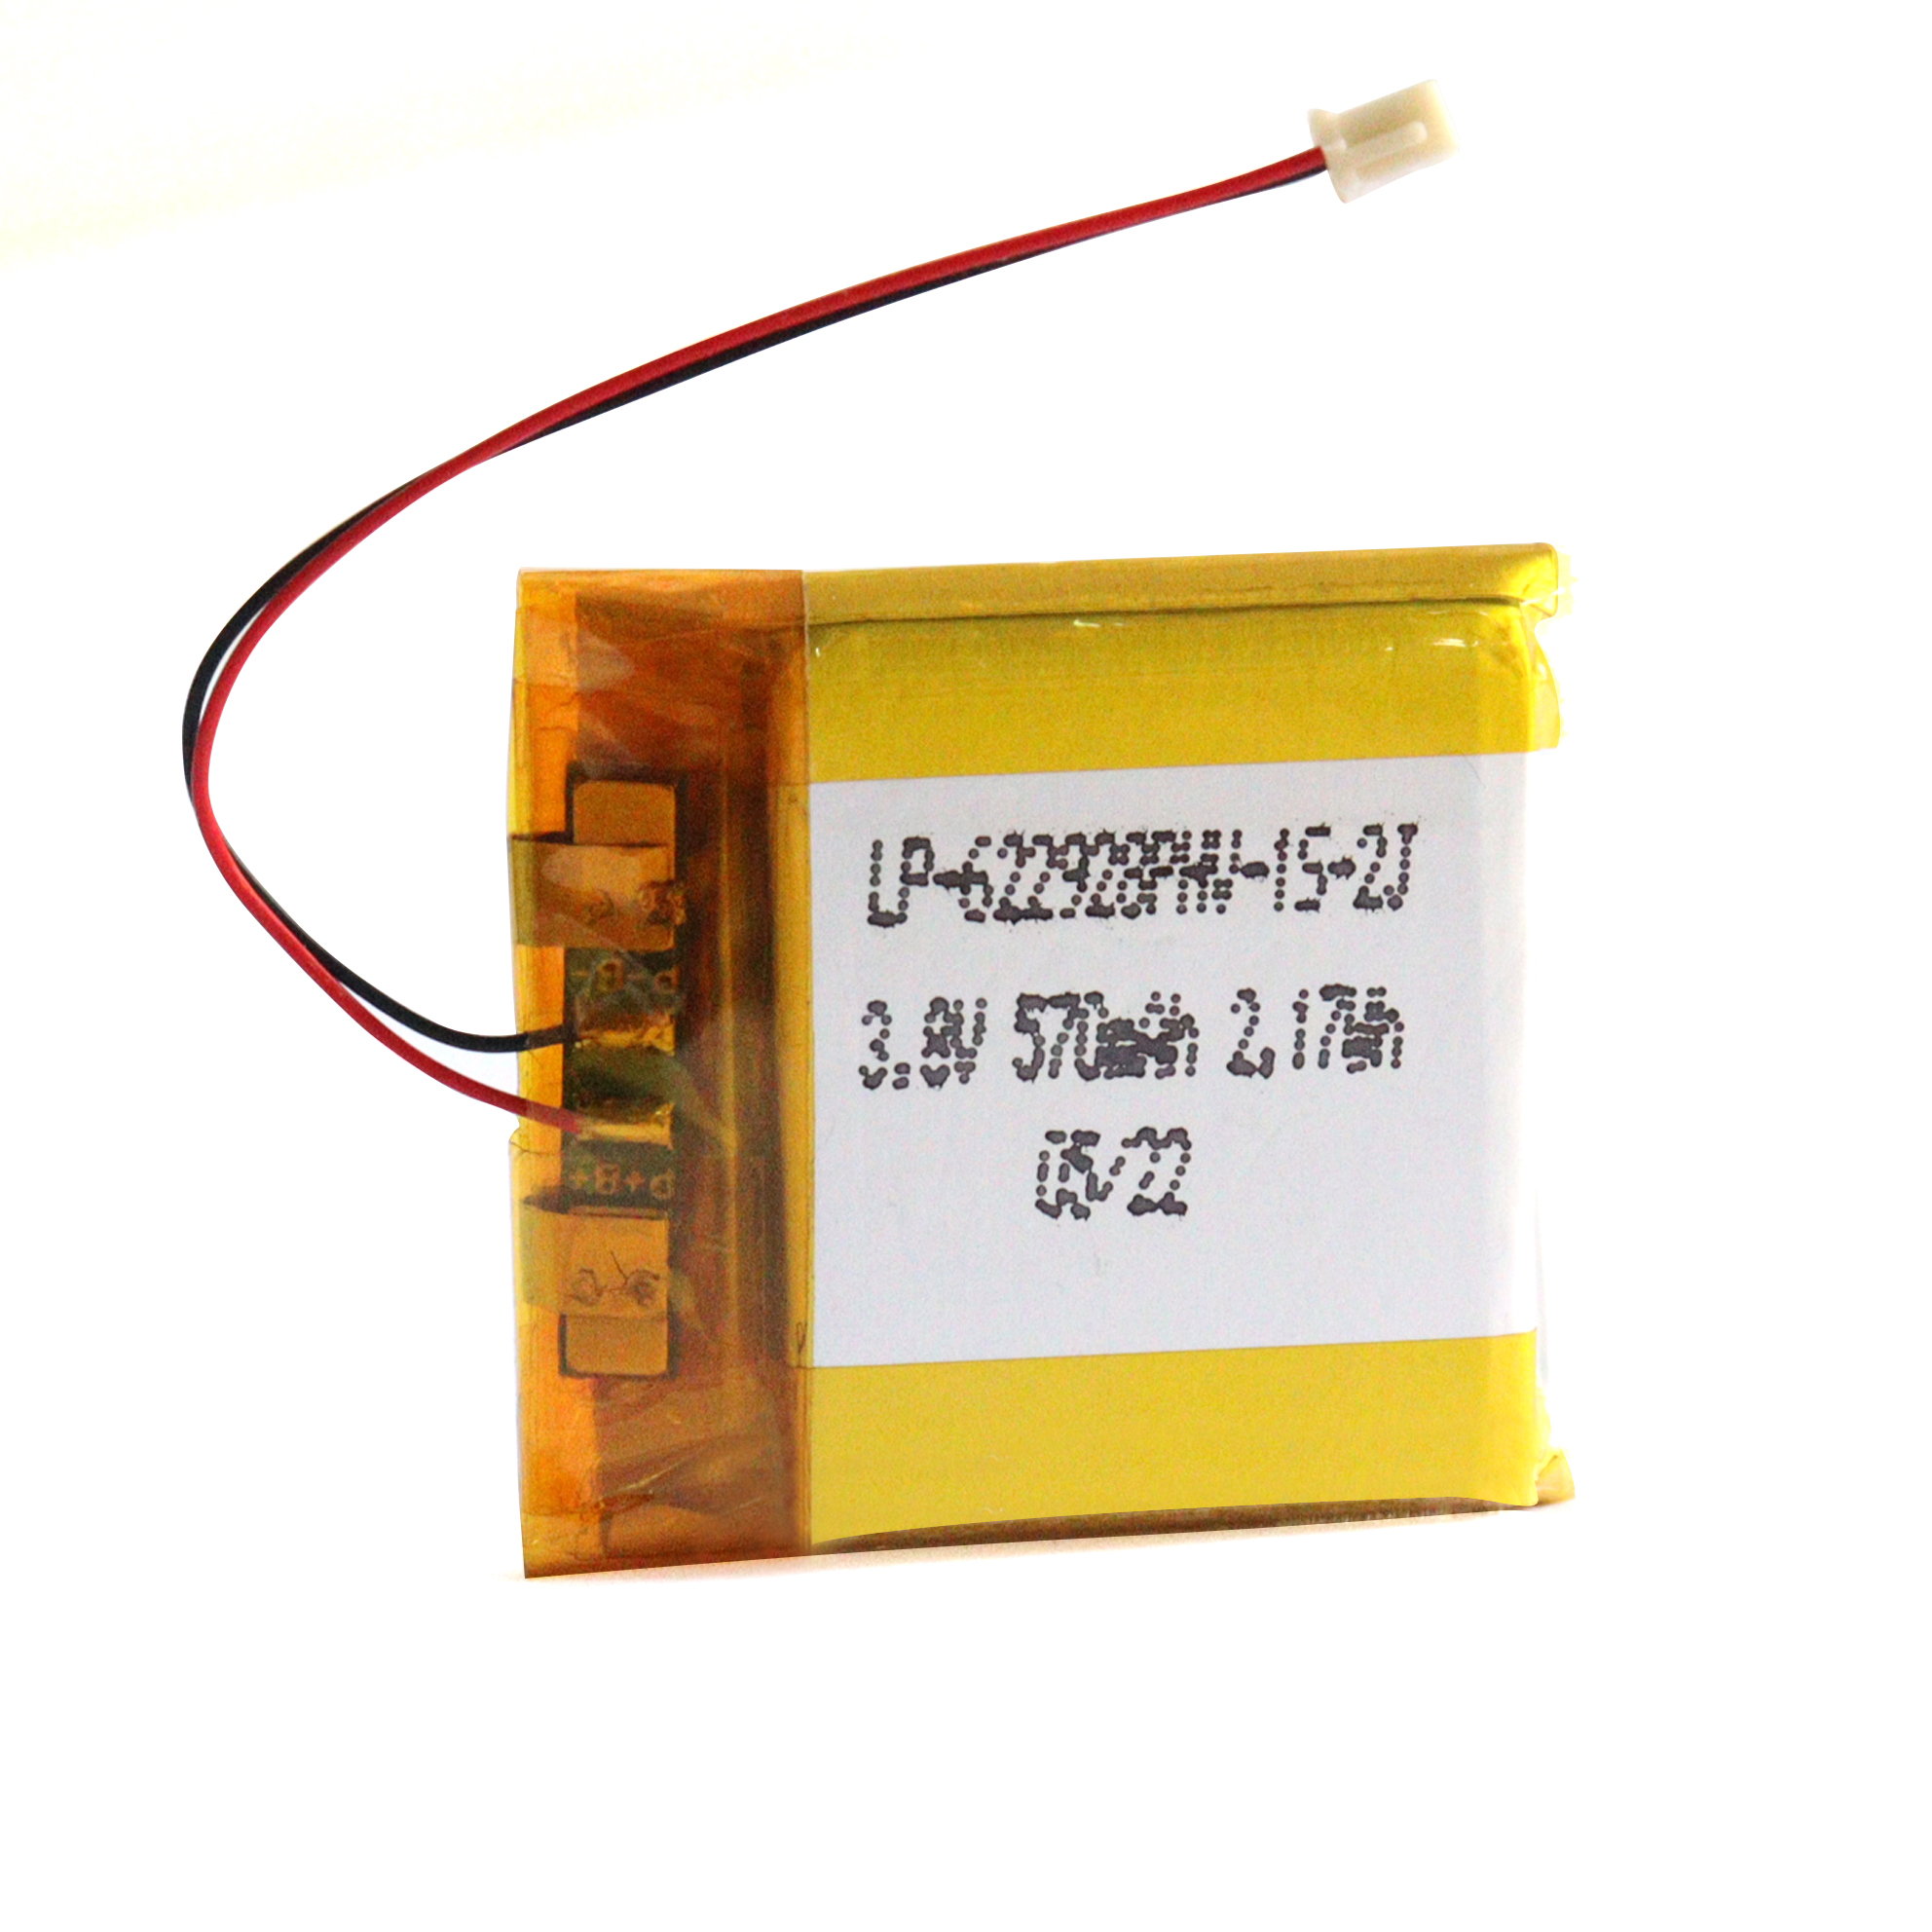 Lithium Ion Polymer Battery 3.8V 570mAh Pouch Battery Pack